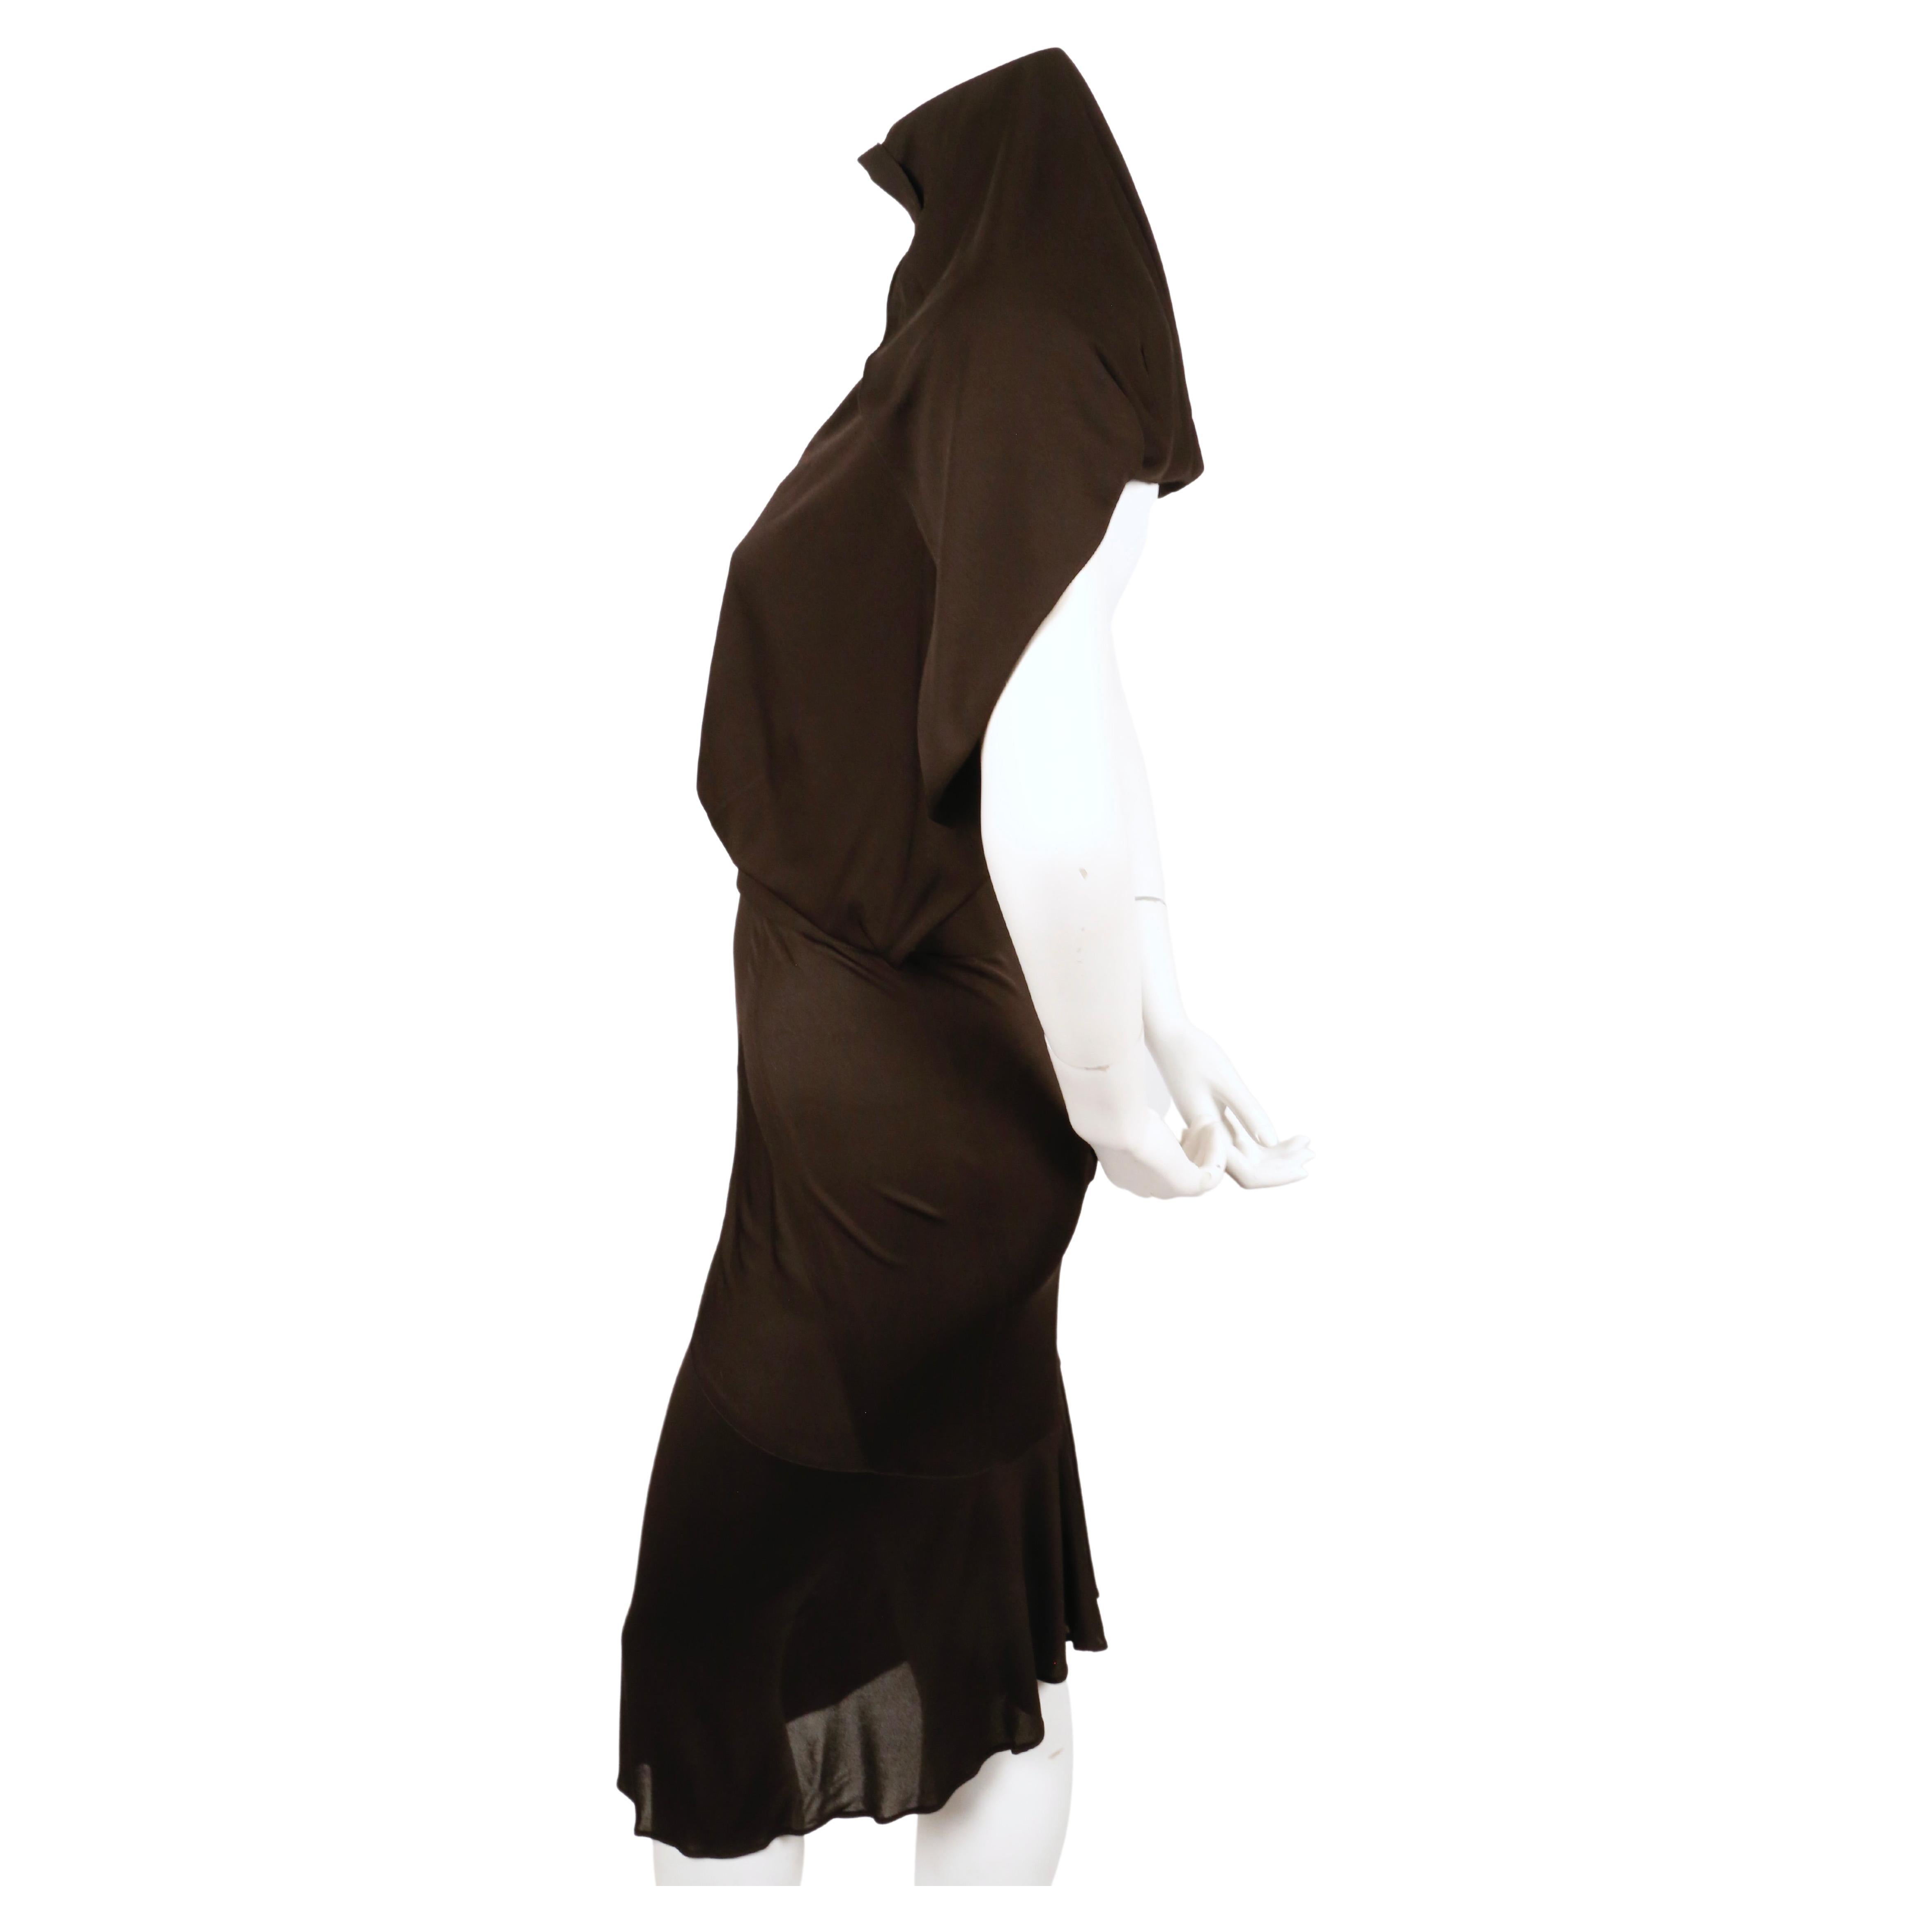 very rare 1984 AZZEDINE ALAIA iconic hooded jersey dress For Sale 8